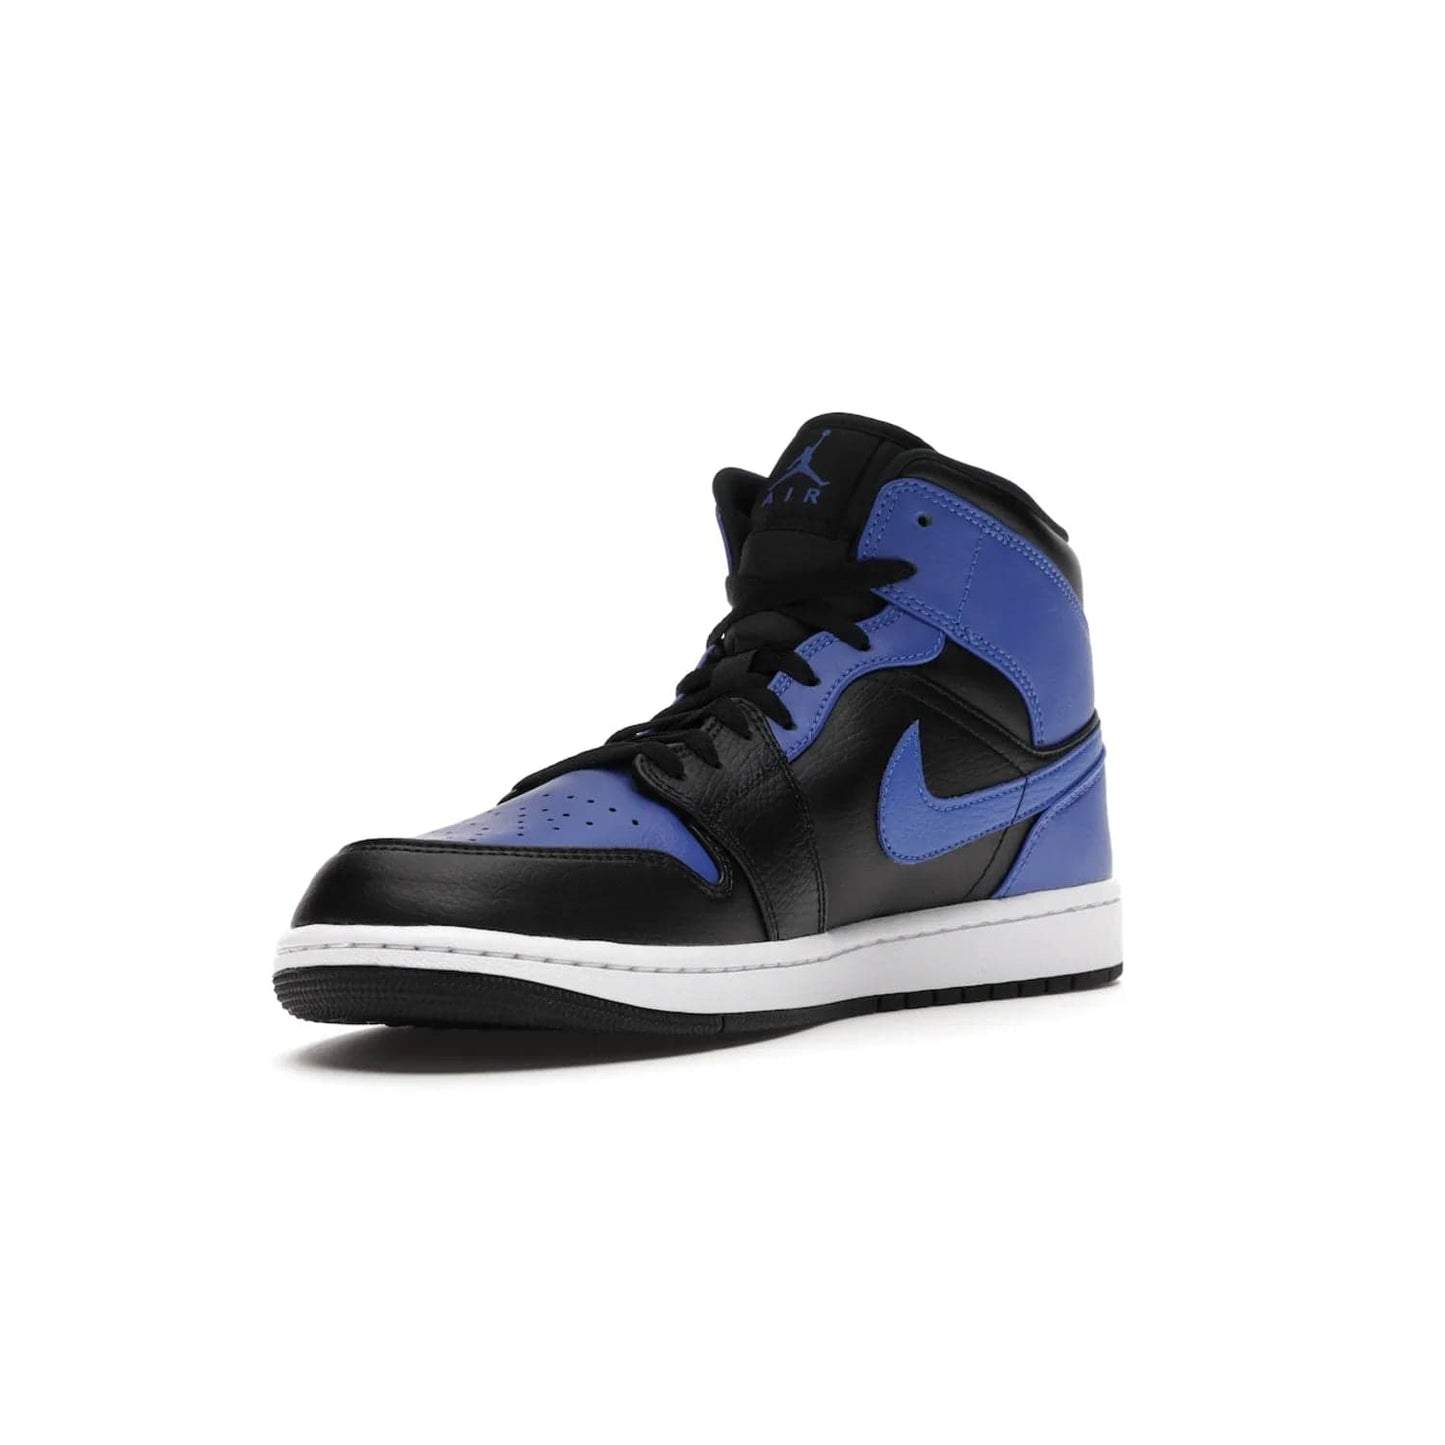 Jordan 1 Mid Hyper Royal Tumbled Leather - Image 14 - Only at www.BallersClubKickz.com - Iconic colorway of the Air Jordan 1 Mid Black Royal Tumbled Leather. Features a black tumbled leather upper, royal blue leather overlays, white midsole & black rubber outsole. Released December 2020. Adds premium style to any collection.